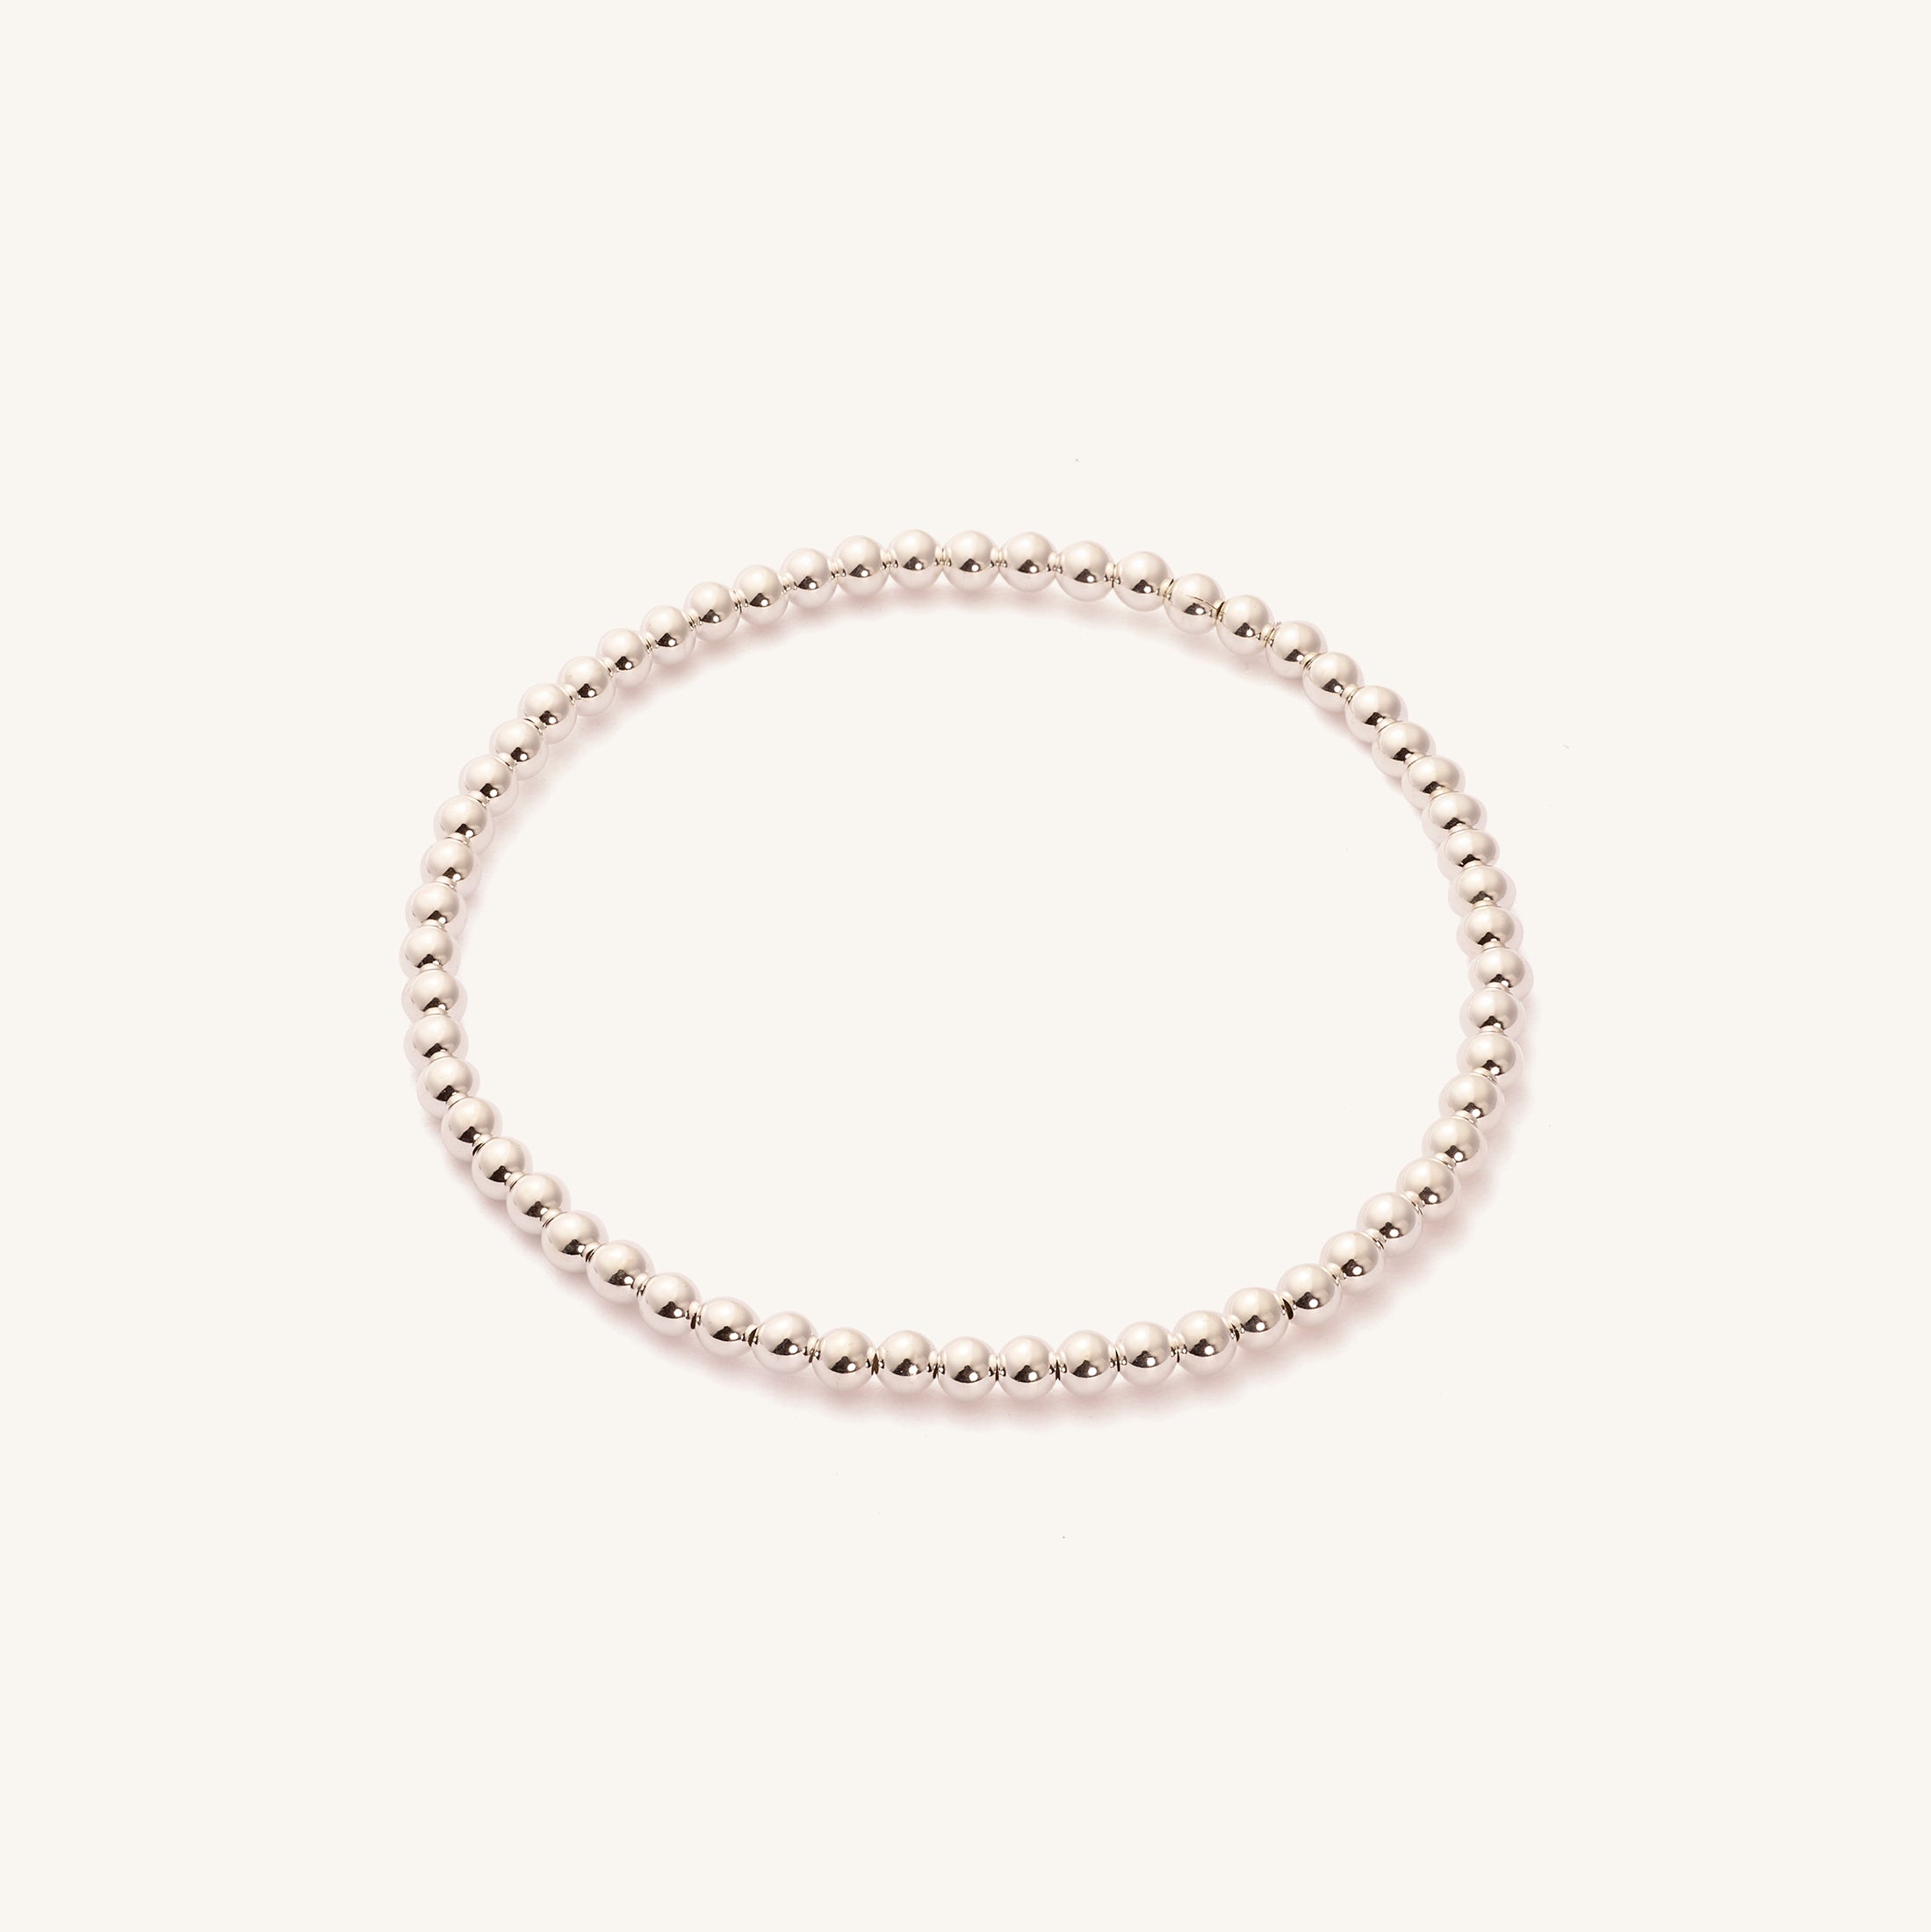 The Katie Sterling Silver Bead Bracelet Silver Bead Stretch